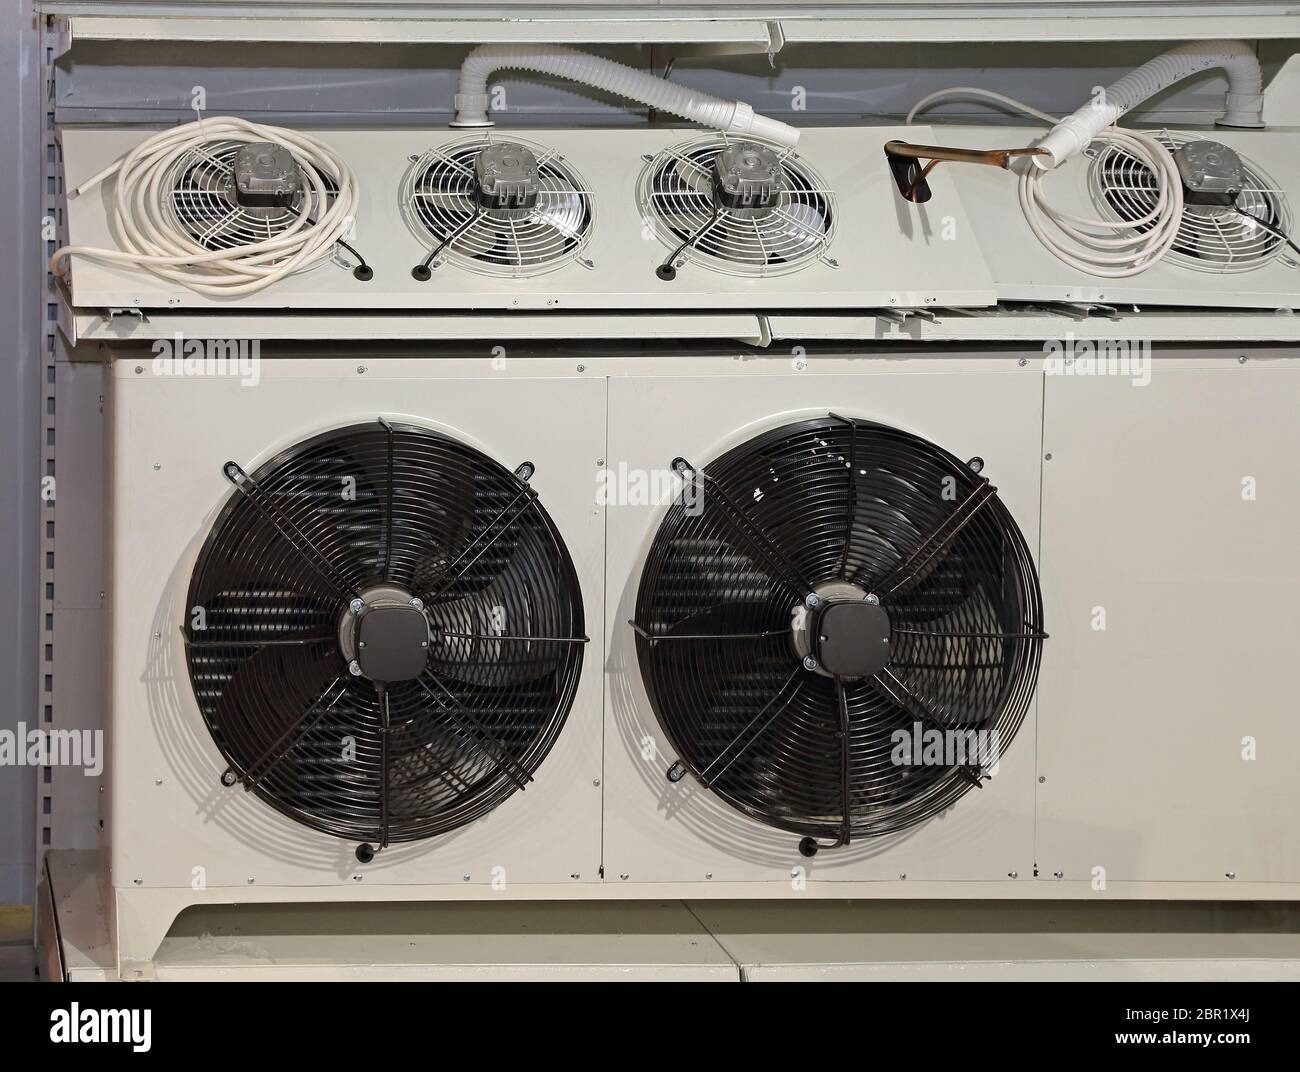 Industrial Fans and Blowers for Big Air Conditioner Unit HVAC Stock Photo